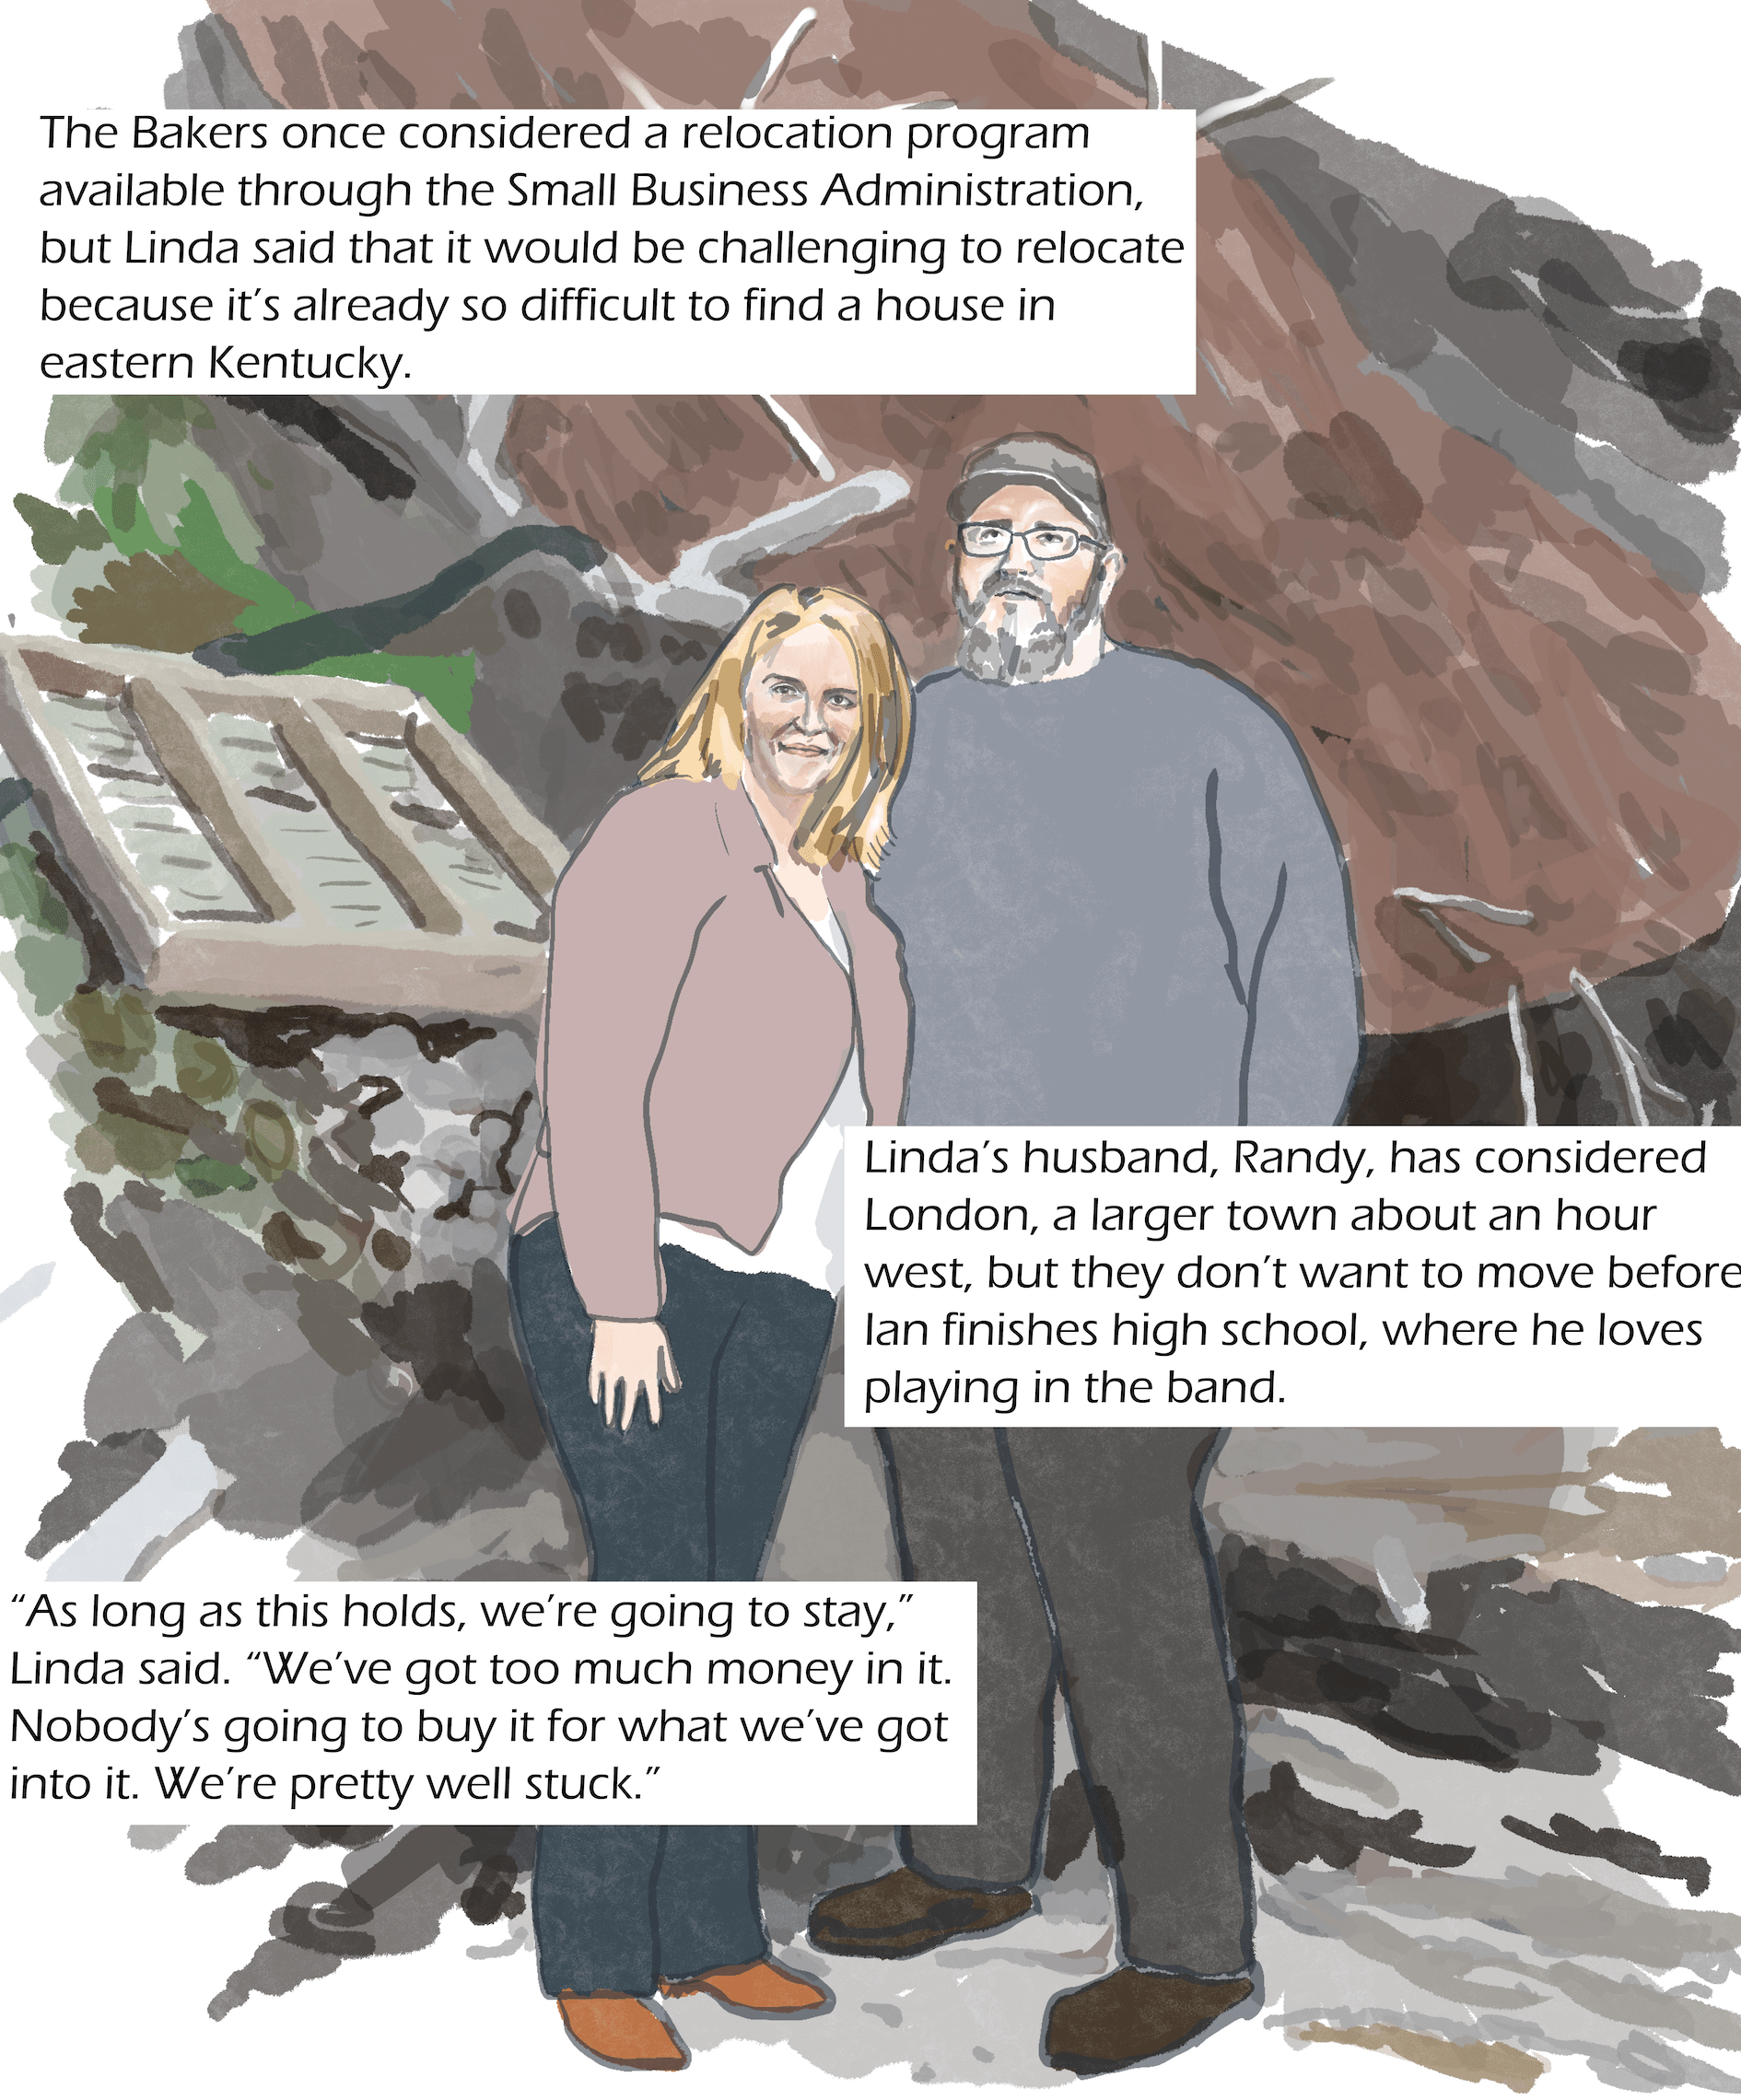 A man and a woman stand in front of a landslide with house pieces mixed in. Text: The Bakers once considered a relocation program available through the Small Business Administration, but Linda said that it would be challenging to relocate because it’s already so difficult to find a house in eastern Kentucky. Linda’s husband, Randy, has considered London, a larger town about an hour west, but they don’t want to move before Ian finishes high school, where he loves playing in the band. Linda Baker: “As long as this holds, we’re going to stay. We’ve got too much money in it. Nobody's going to buy it for what we've got into it. We're pretty well stuck.”